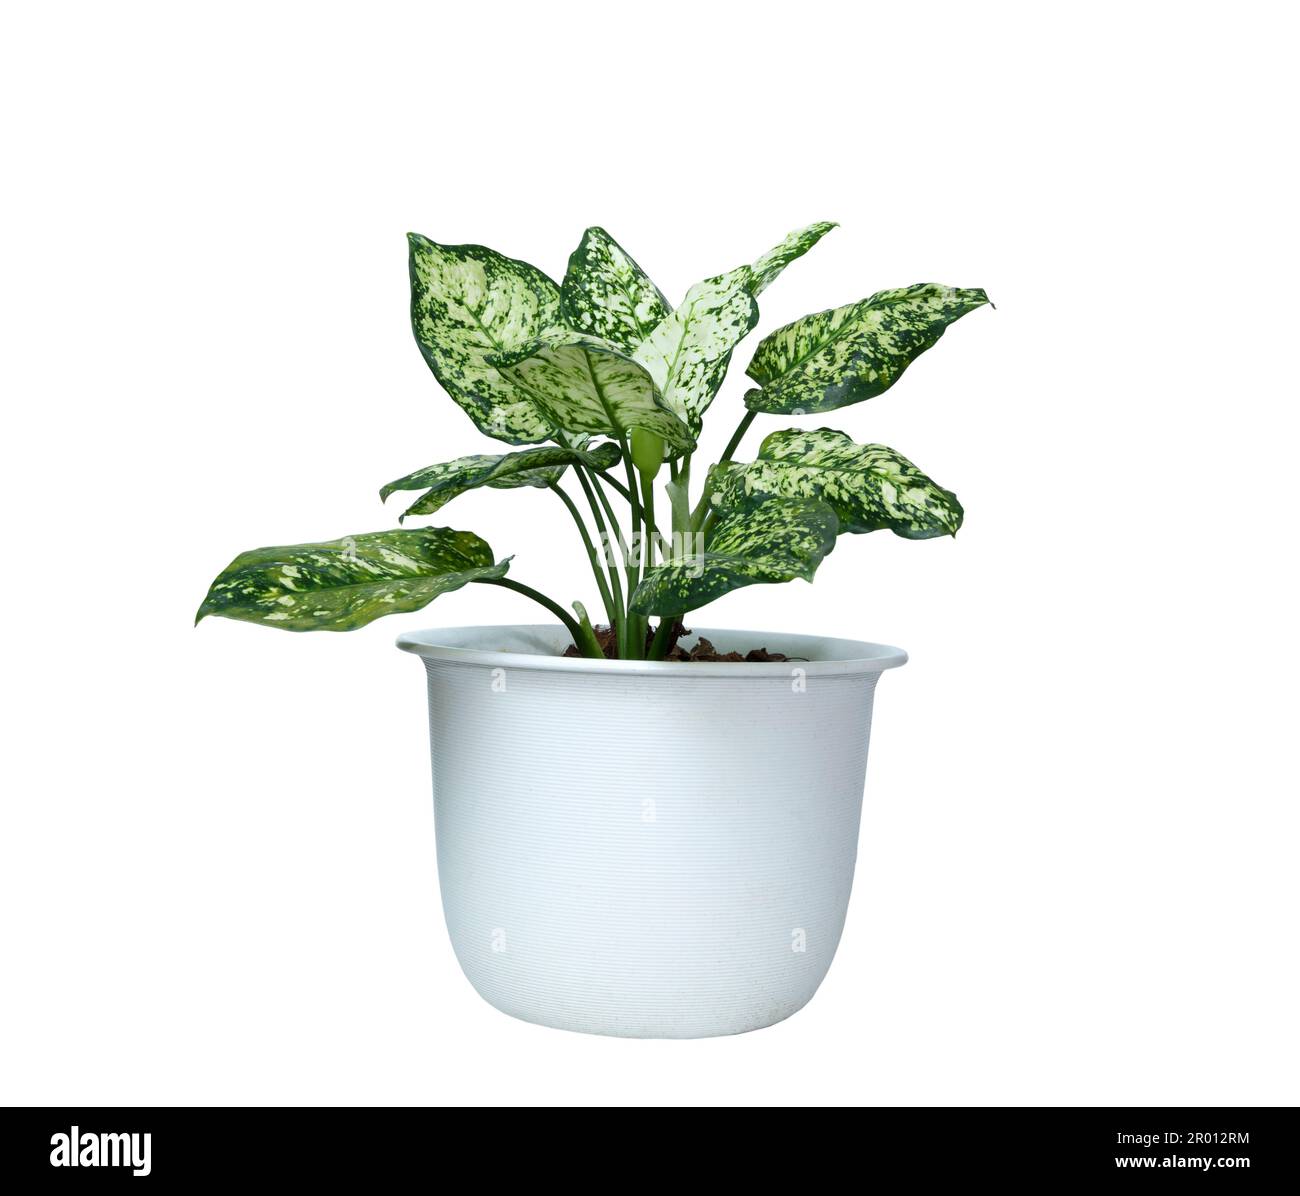 Aglaonema foliage, Spring Snow Chinese Evergreen) plant in white pot isolated on white background. Houseplant care concept. Indoor plant. Stock Photo